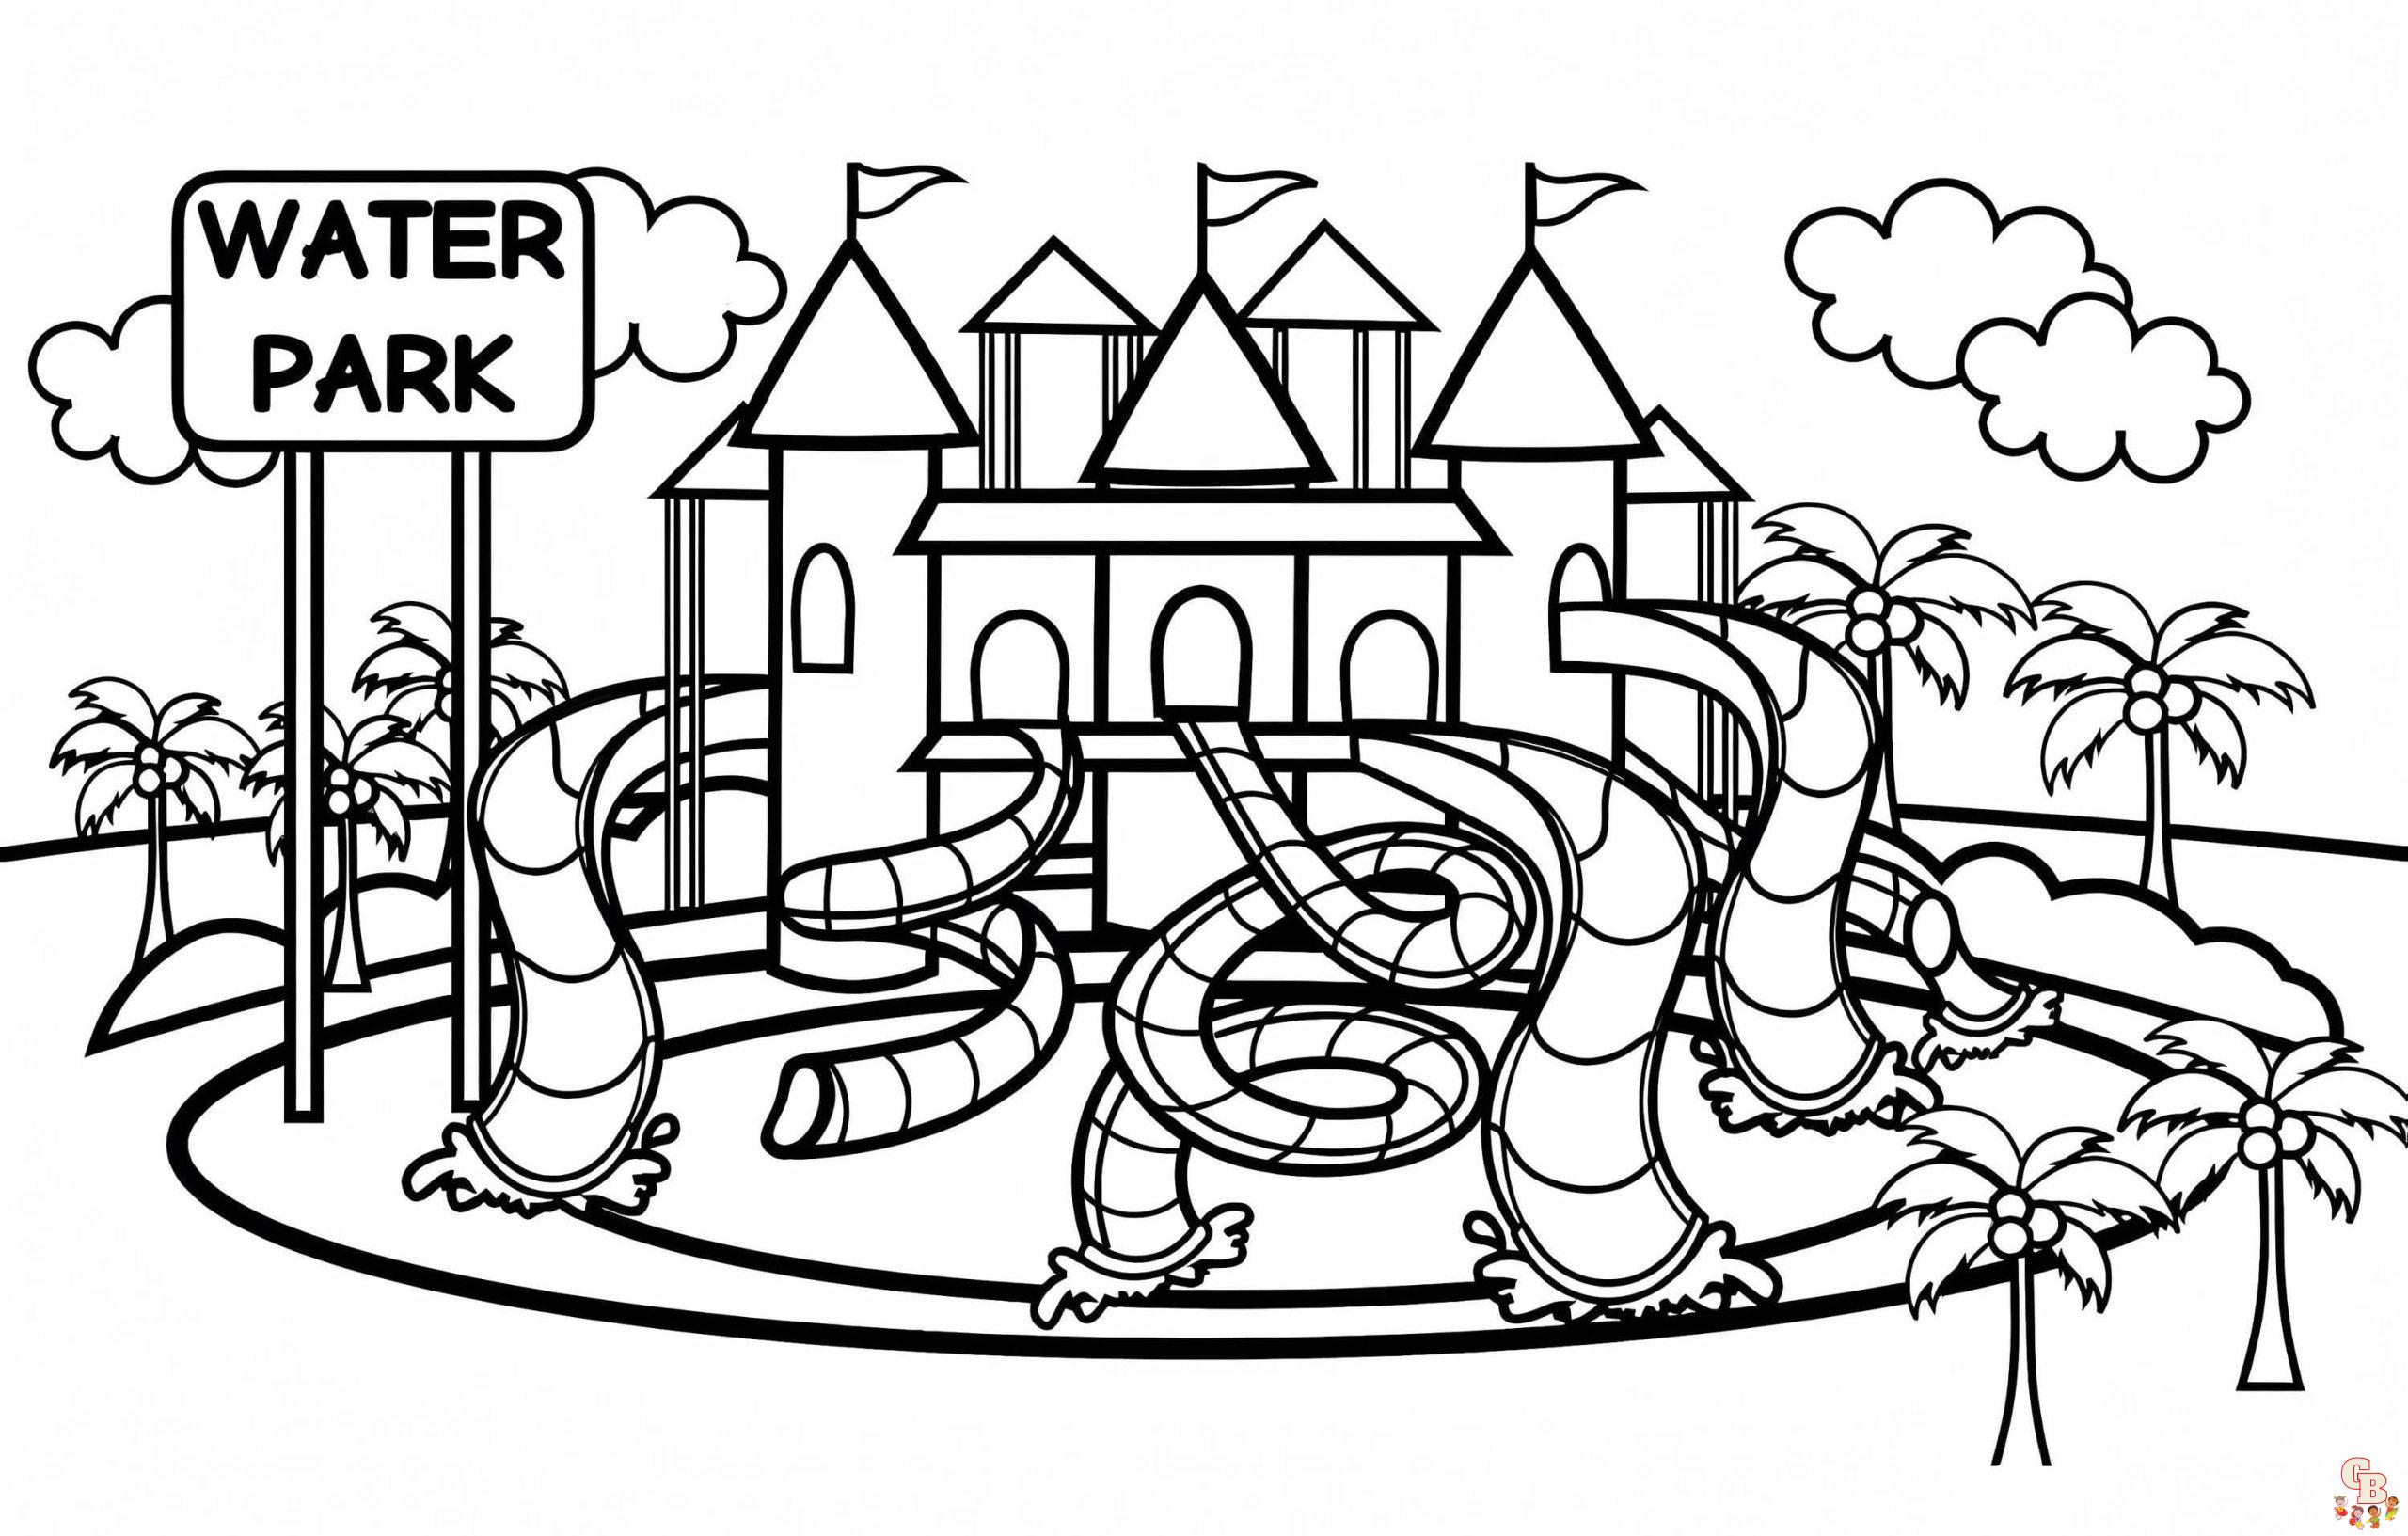 Free waterpark coloring pages for kids